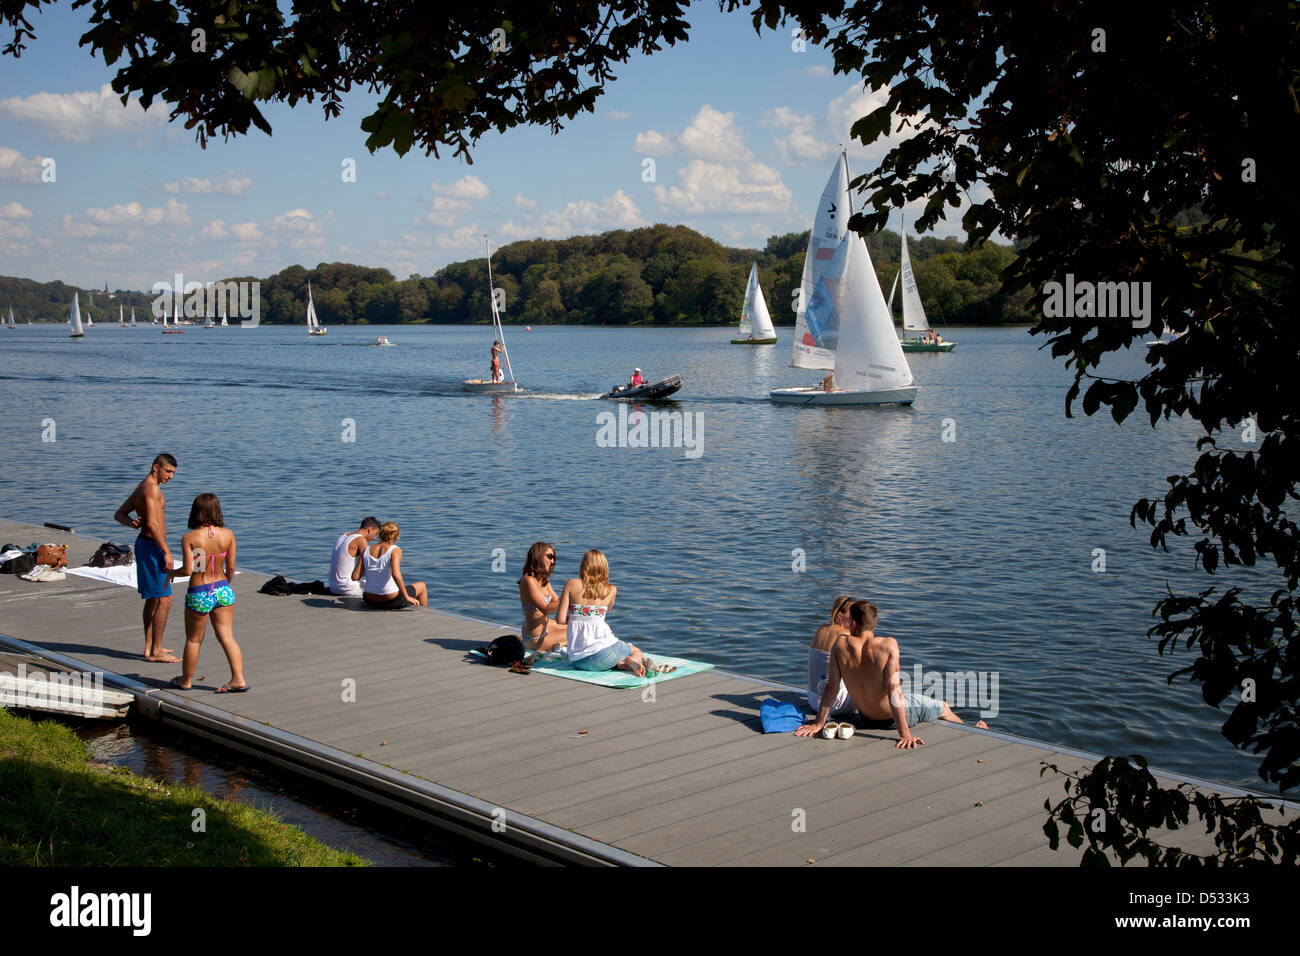 Essen, Germany, sailboats on the Baldeneysee and people at the boat dock Stock Photo